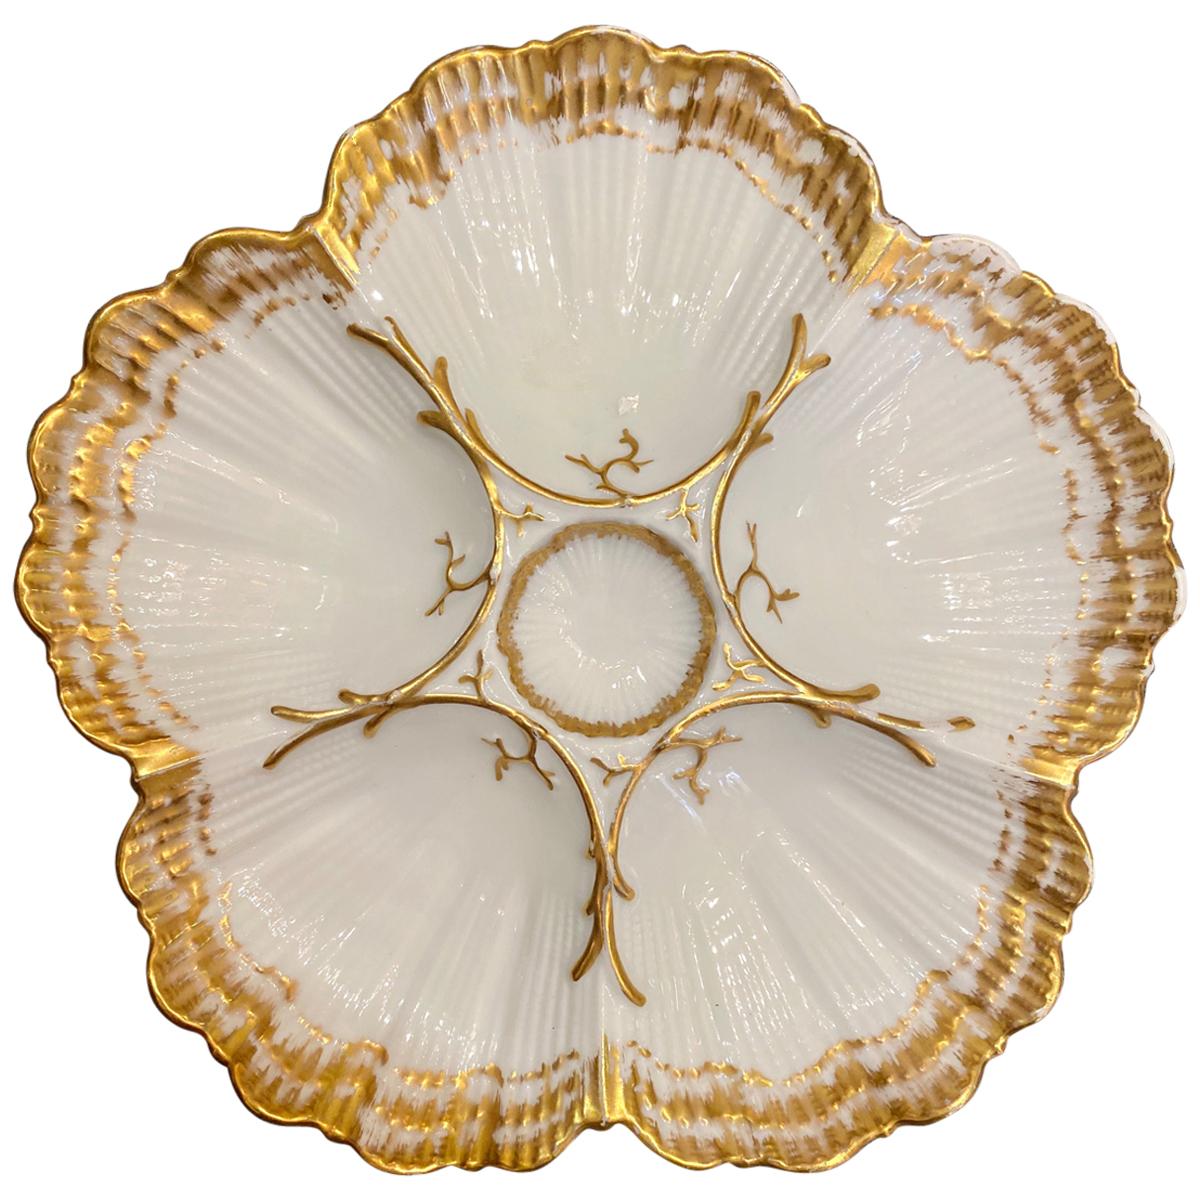 Antique French Limoges Porcelain Oyster Plate Made by "M. Redon, " circa 1870